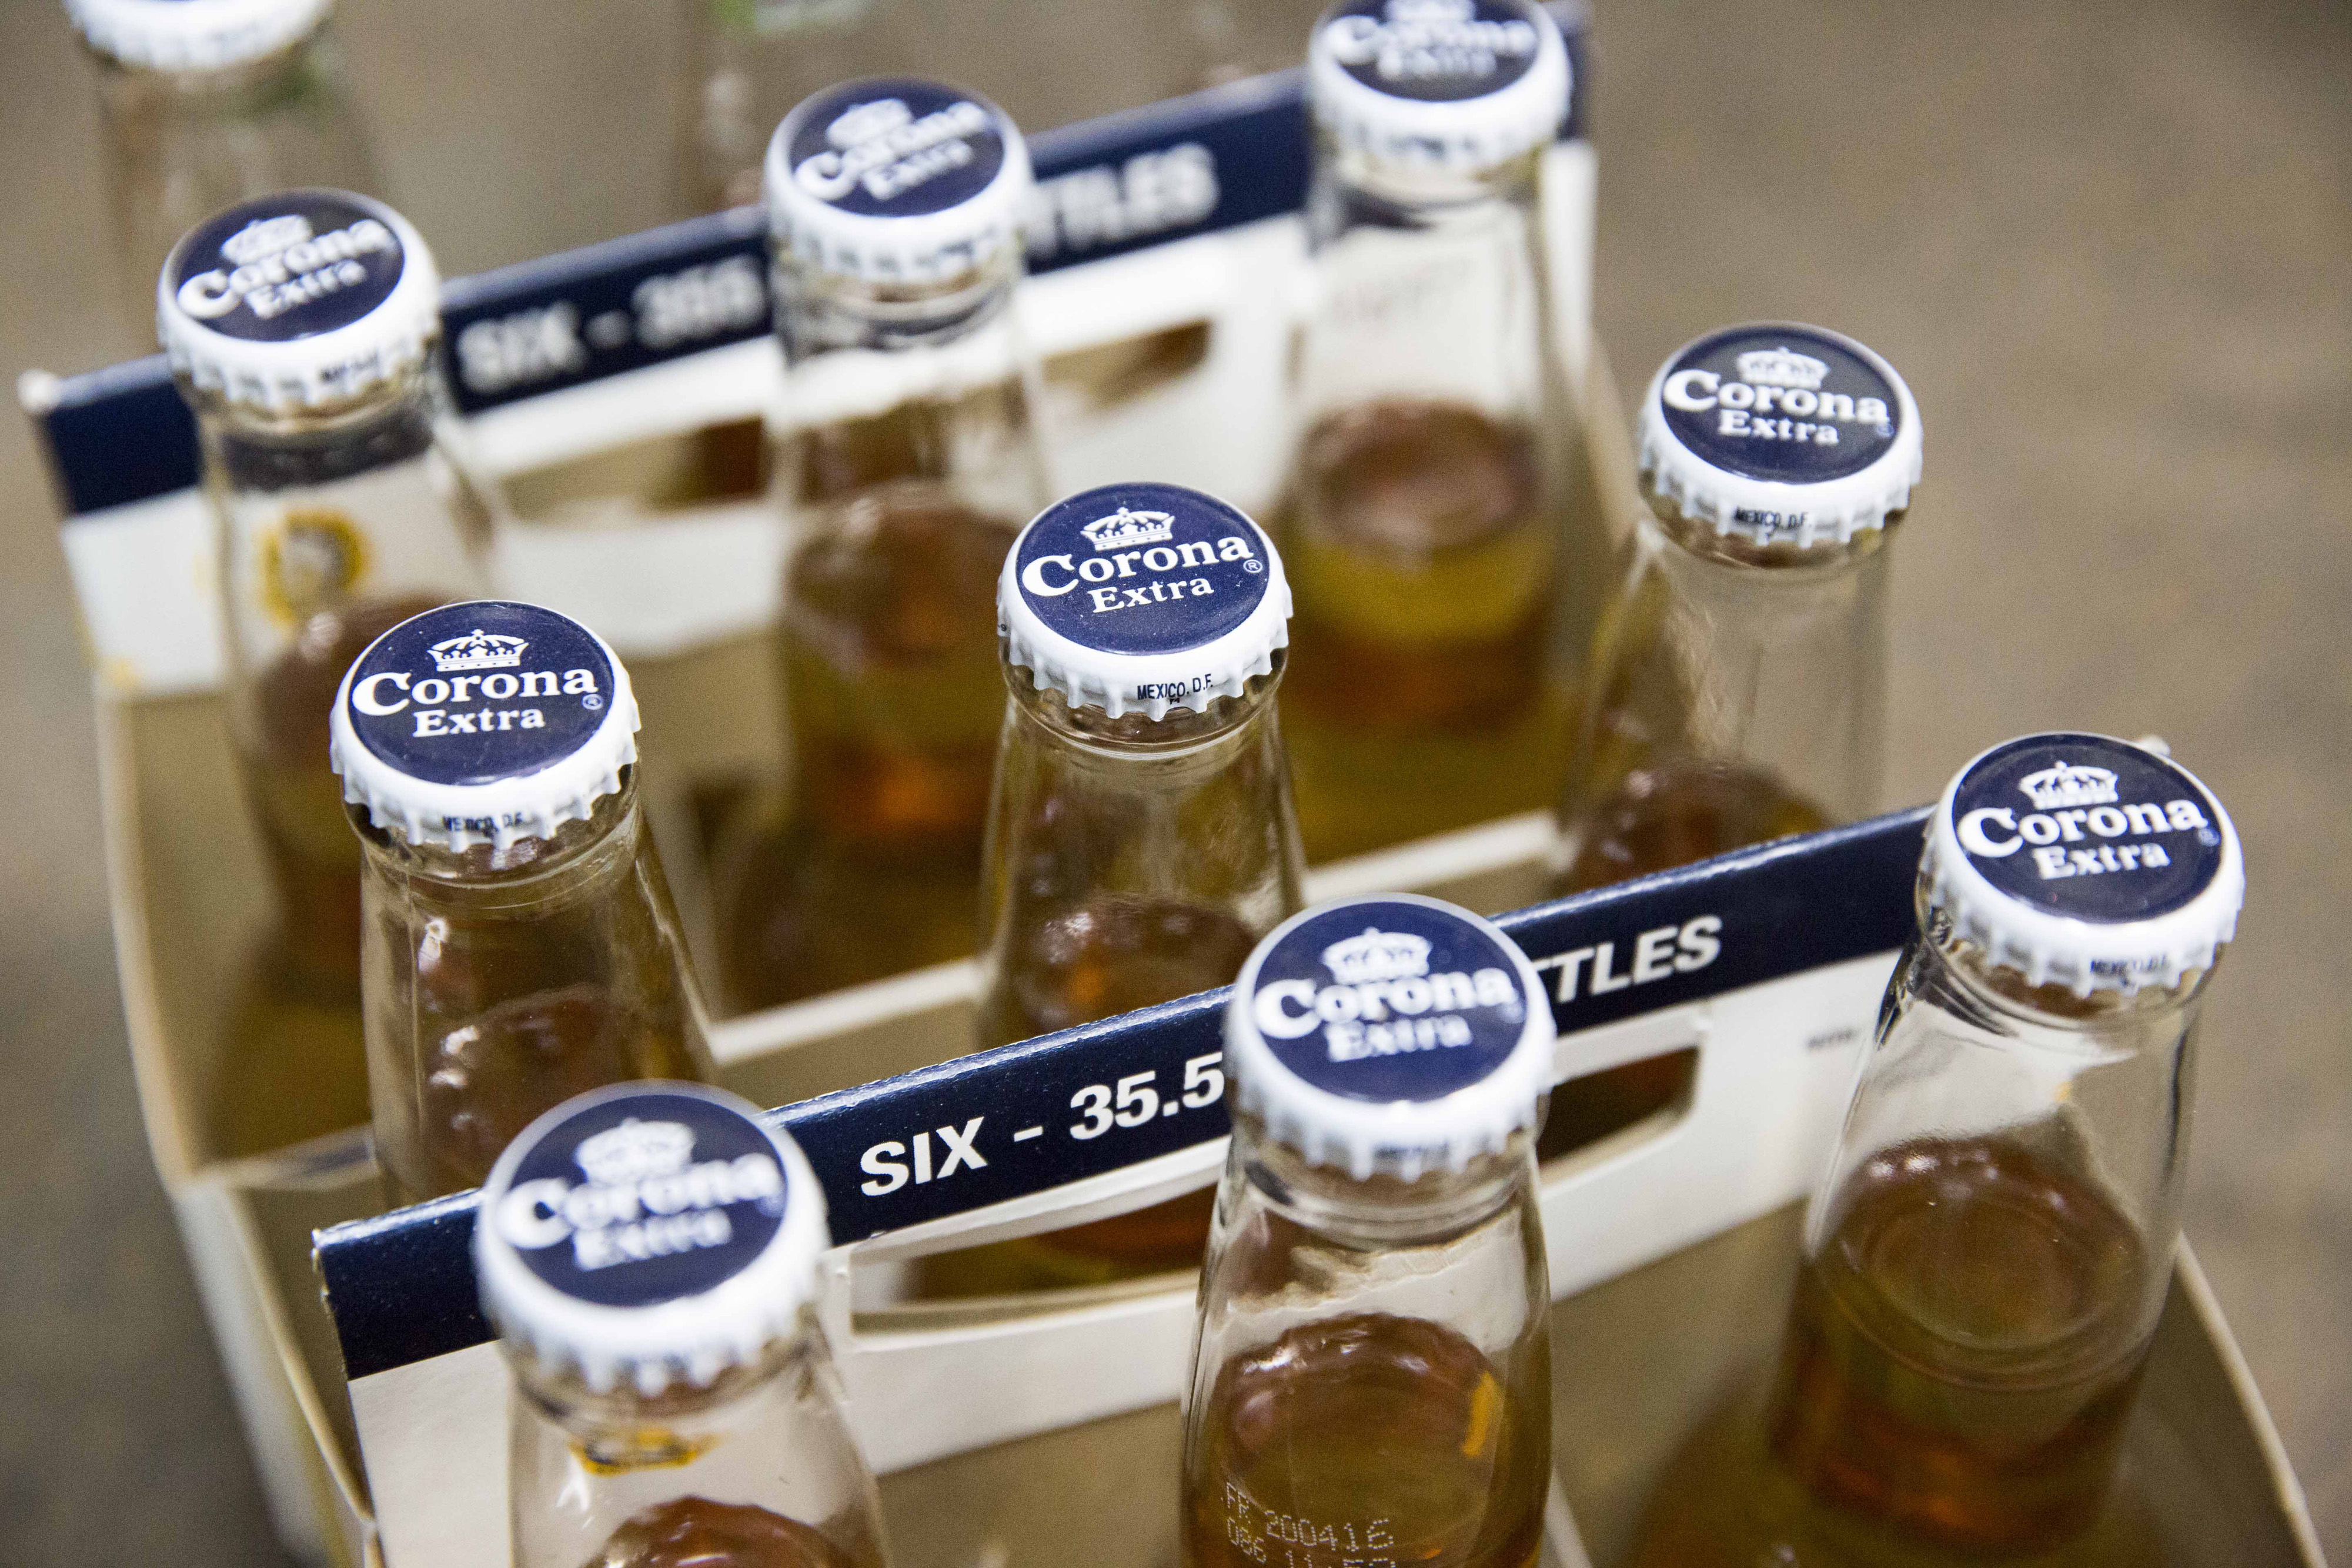 Six packs of bottled Corona beer, produced by Anheuser-Busch InBev NV, sit on display in a store in Paris, France, on Thursday, Oct. 15, 2015. AB Inbev is planning to sell bonds worth as much as $55 billion to finance its $106 billion takeover of SABMiller Plc, setting a record for debt issuance to fund a corporate acquisition, according to people familiar with the matter. (Bloomberg—Bloomberg via Getty Images)